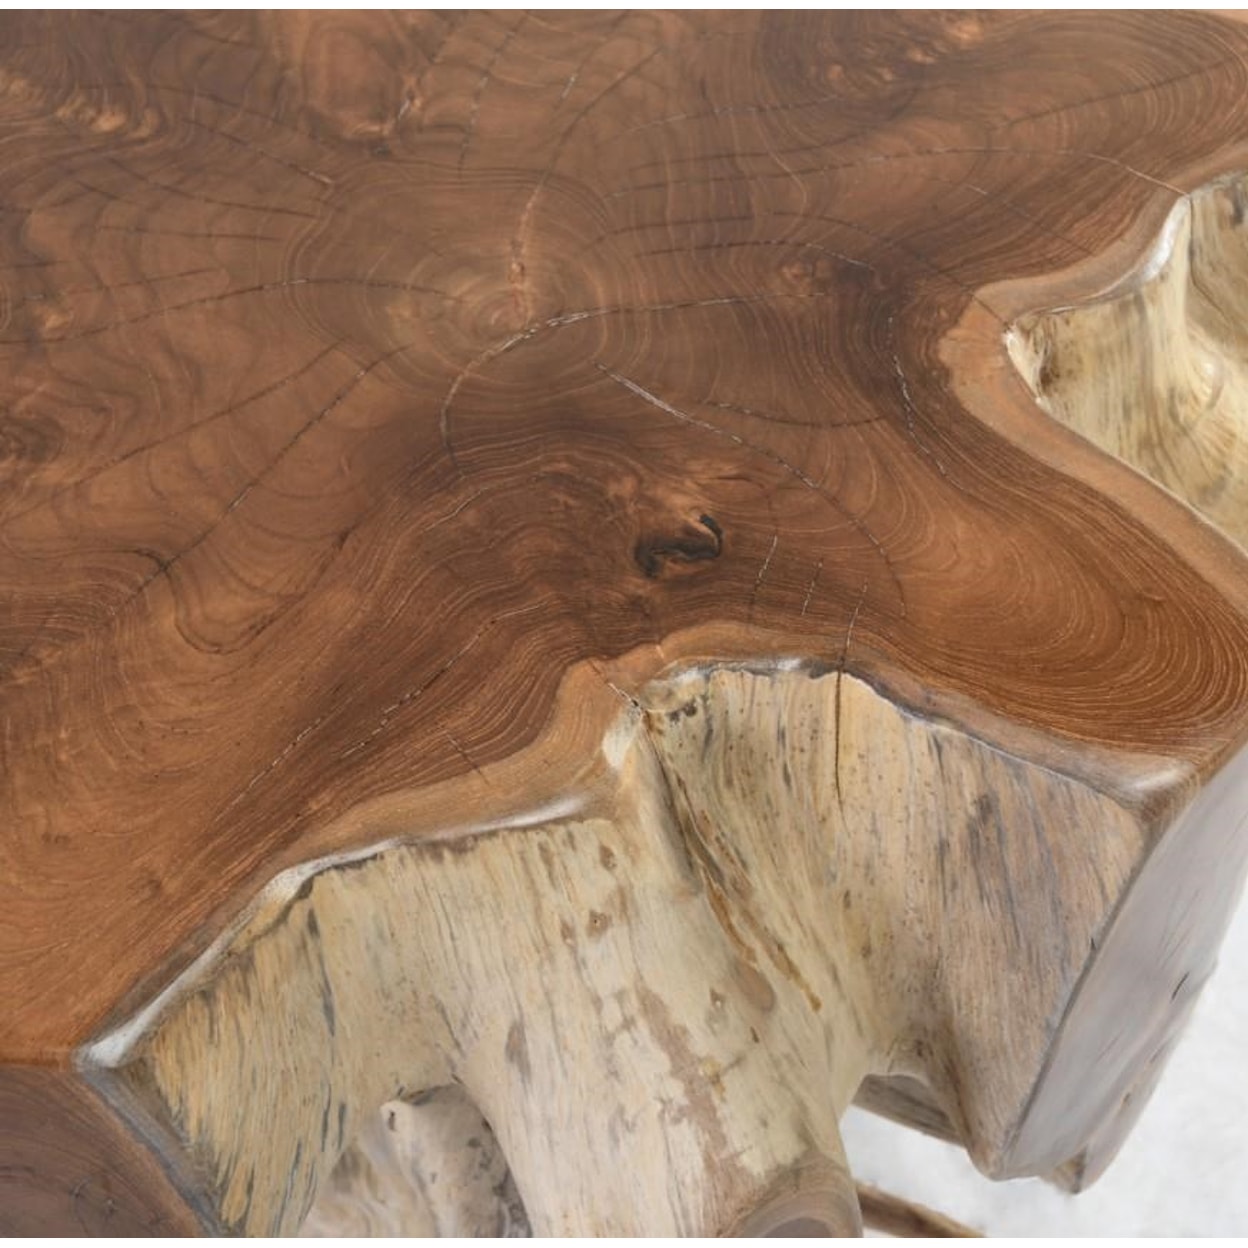 Urban Classics GROOT Groot End Table